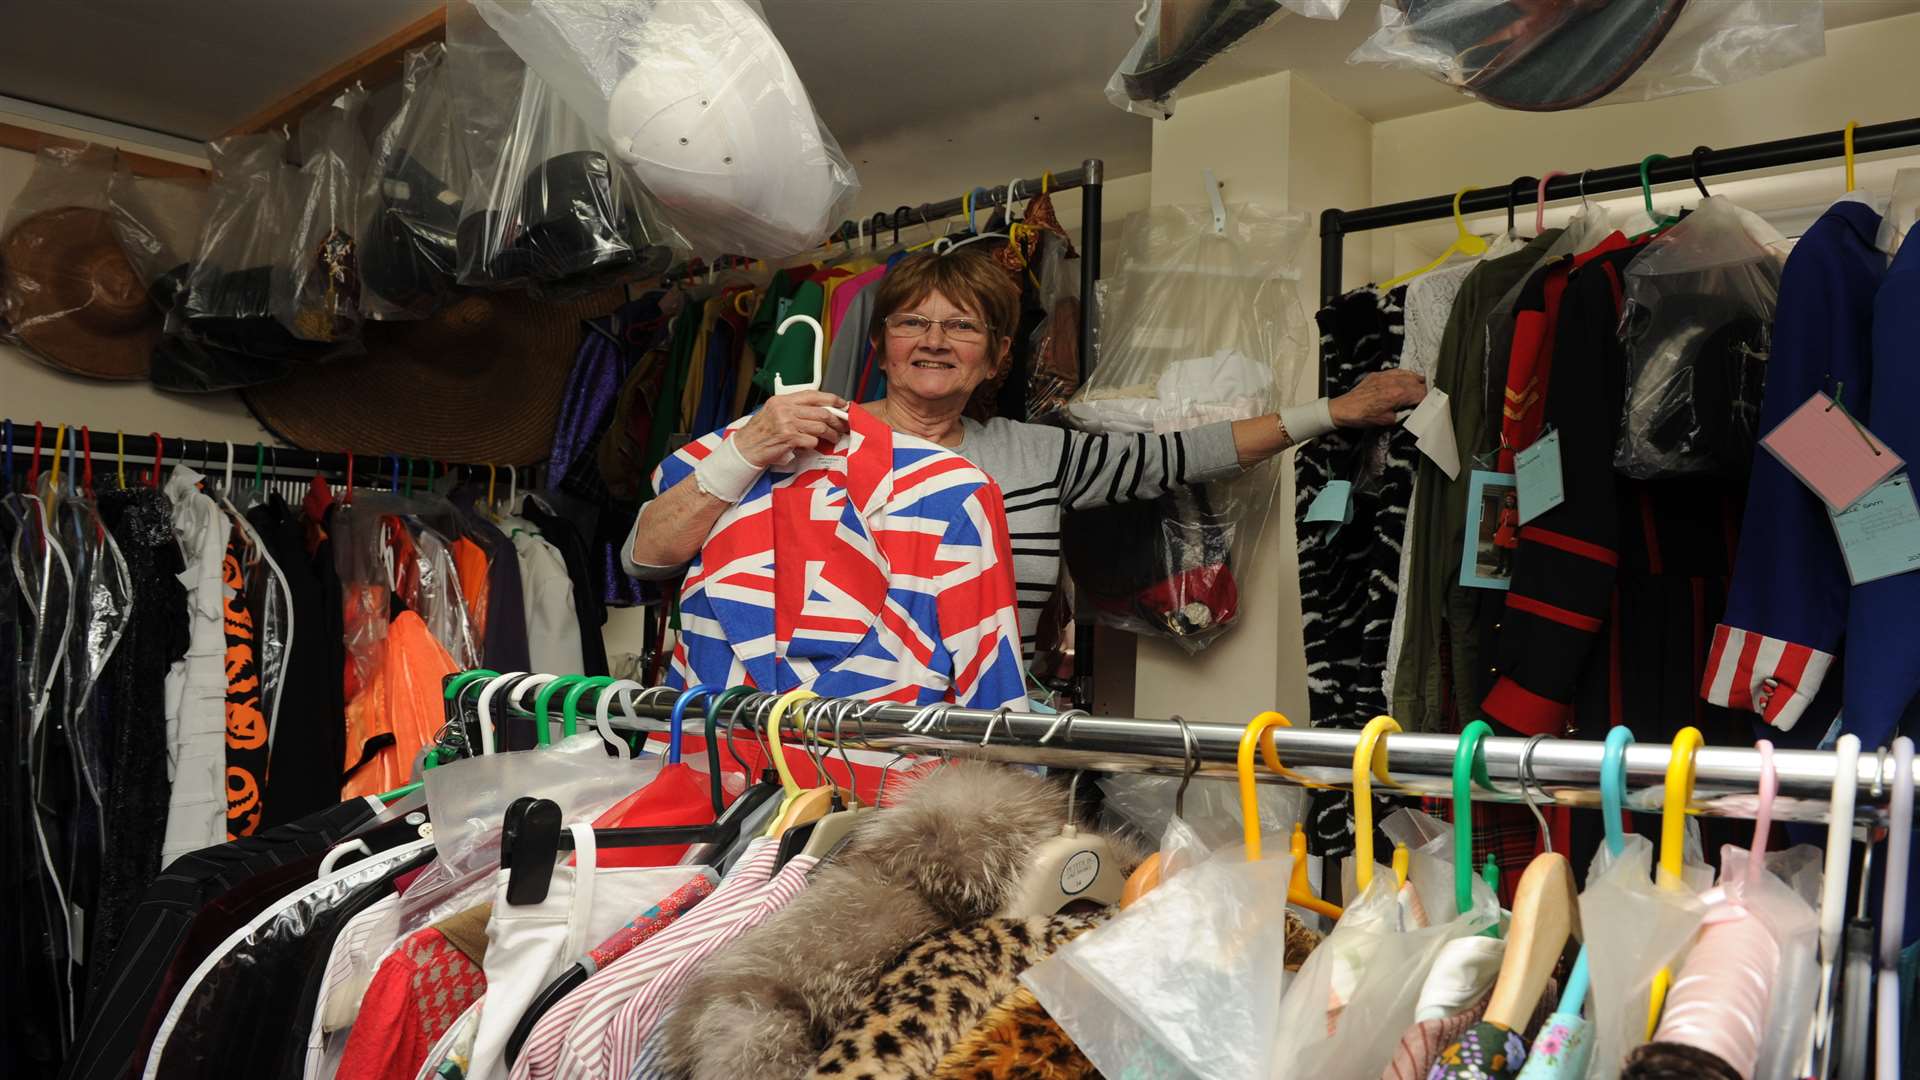 Wendy's Wardrobe started out in a portable building in Walderslade.